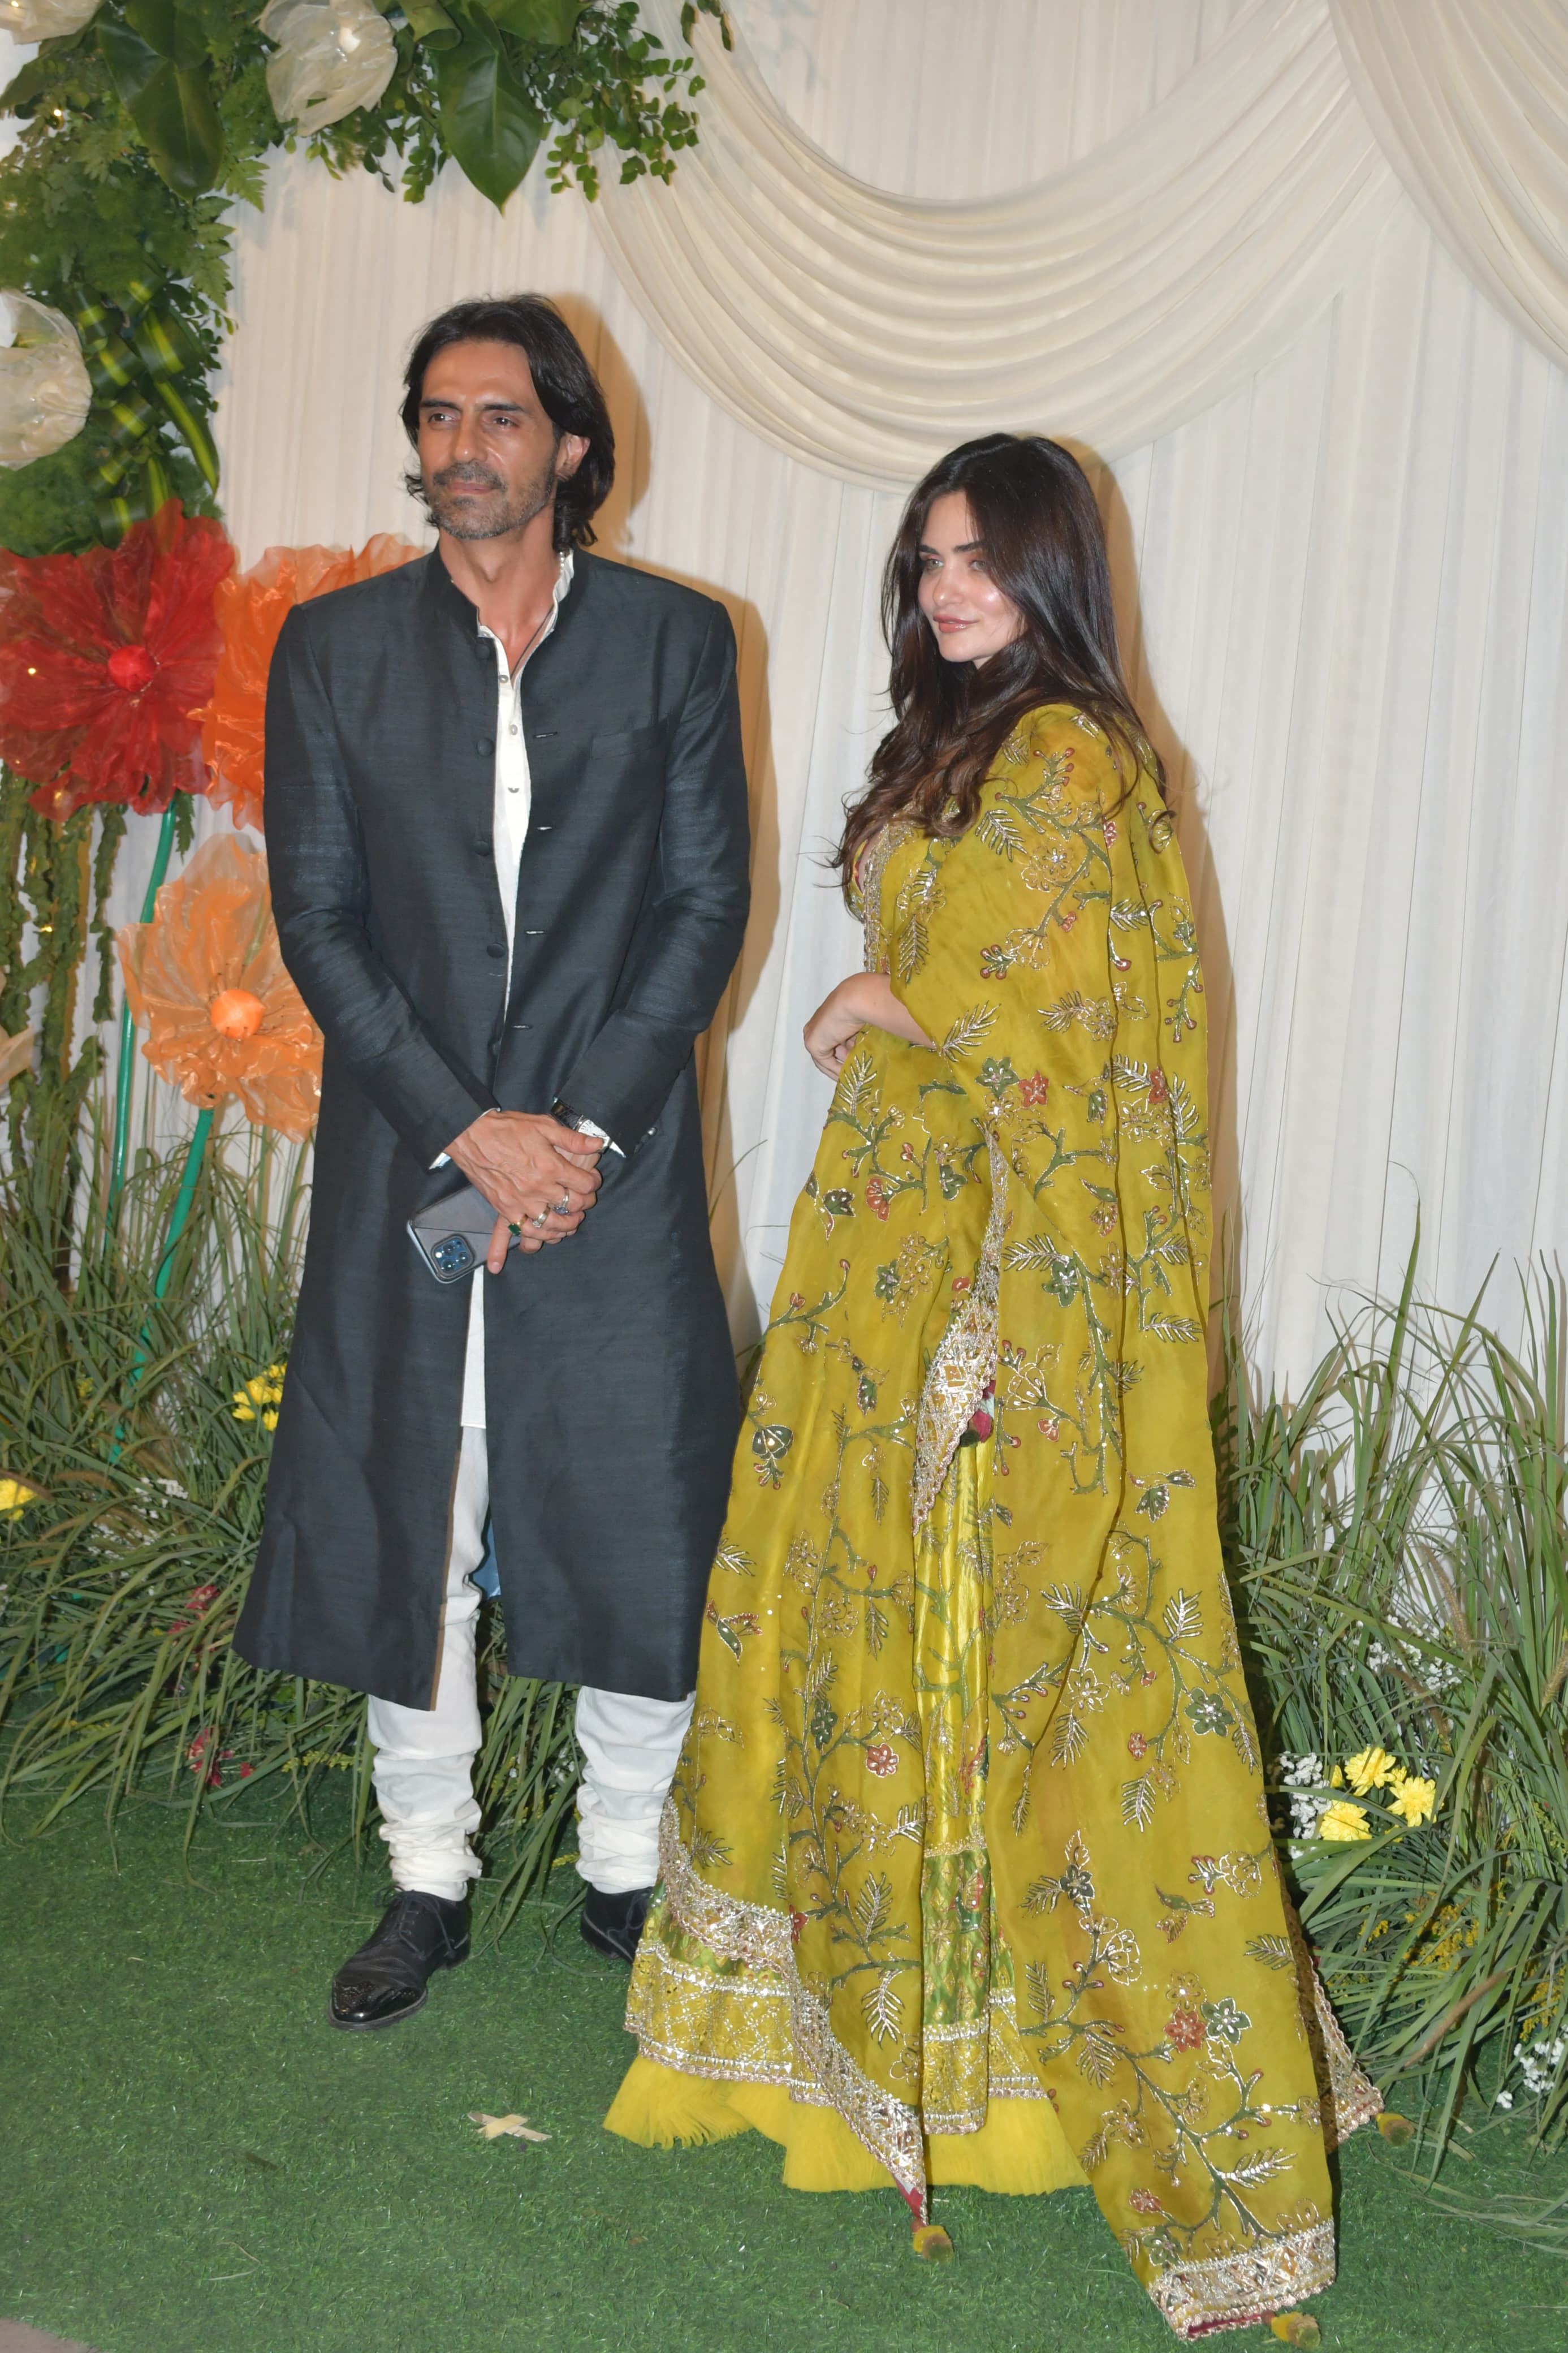 Arjun Rampal was also spotted at the party with his girlfriend